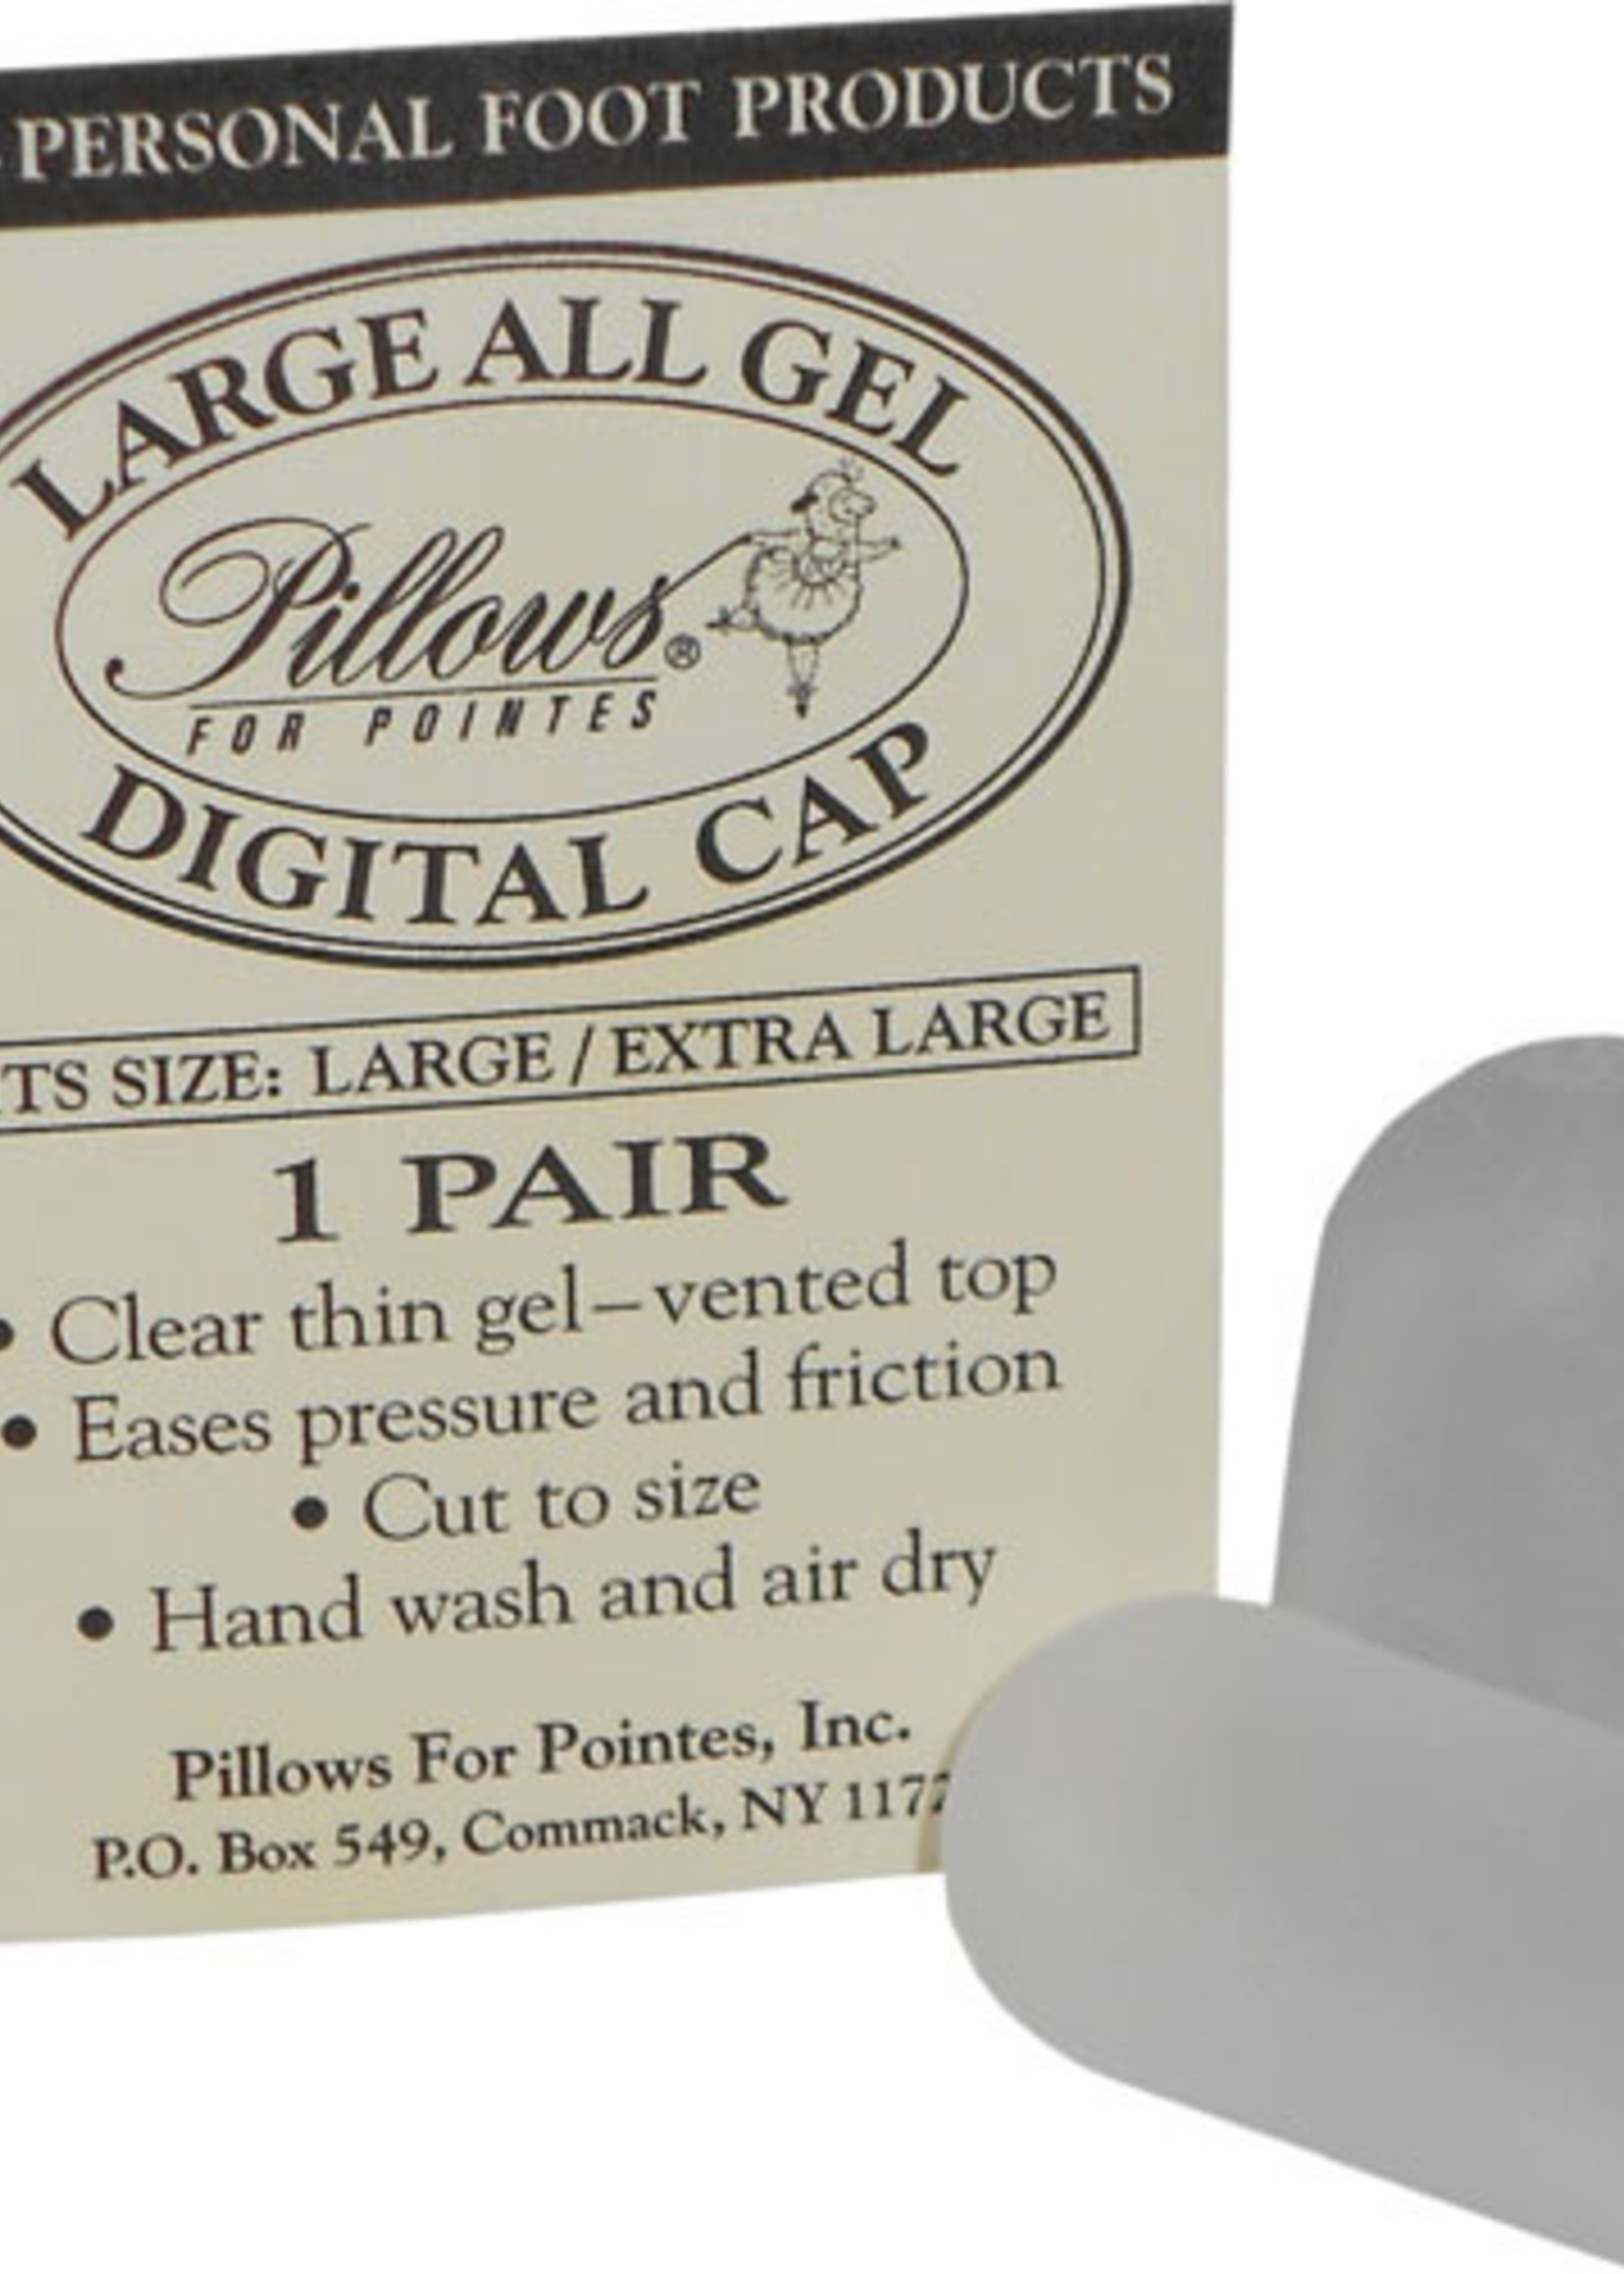 Pillows for Pointe Pillows for Pointe Large Gel Digital Cap